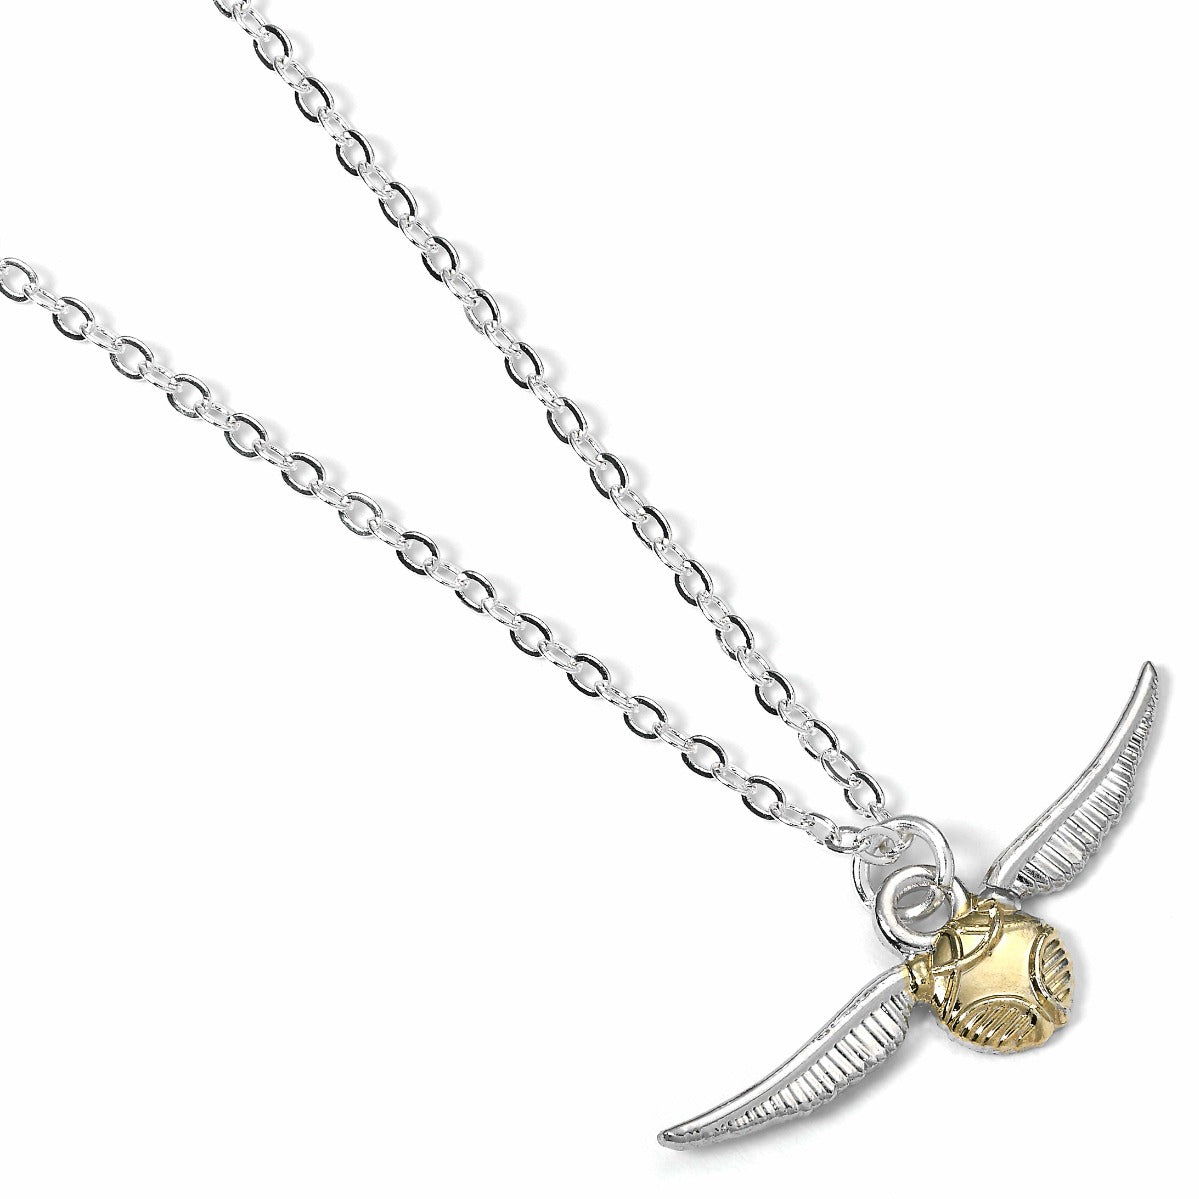 Harry Potter Golden Snitch Necklace - Inspire Newquay